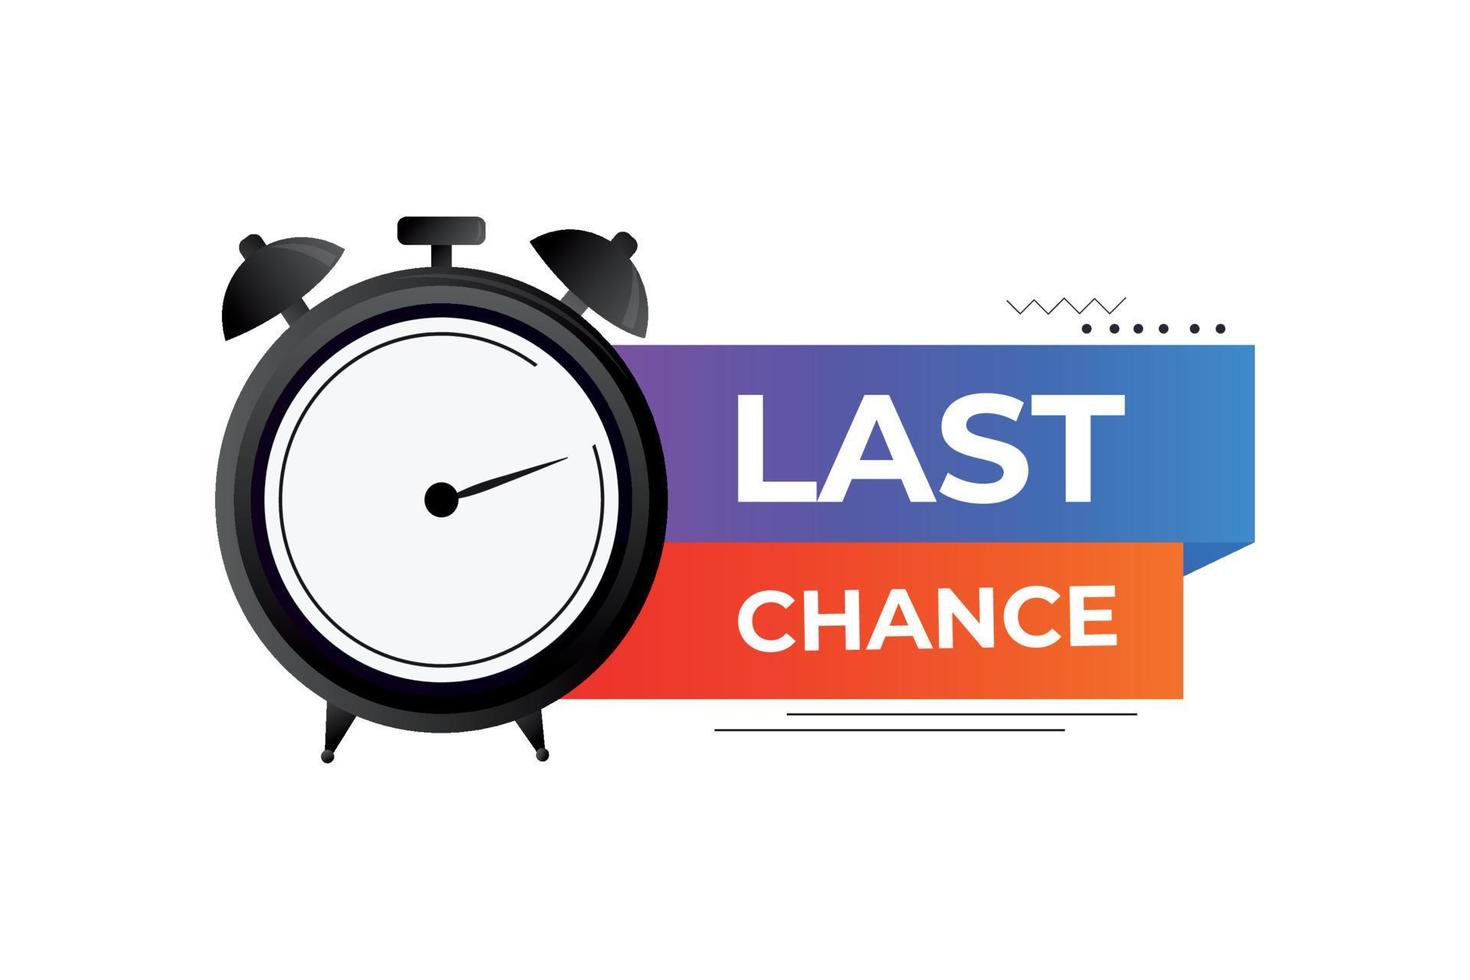 Last Chance with countdown clock vector illustration